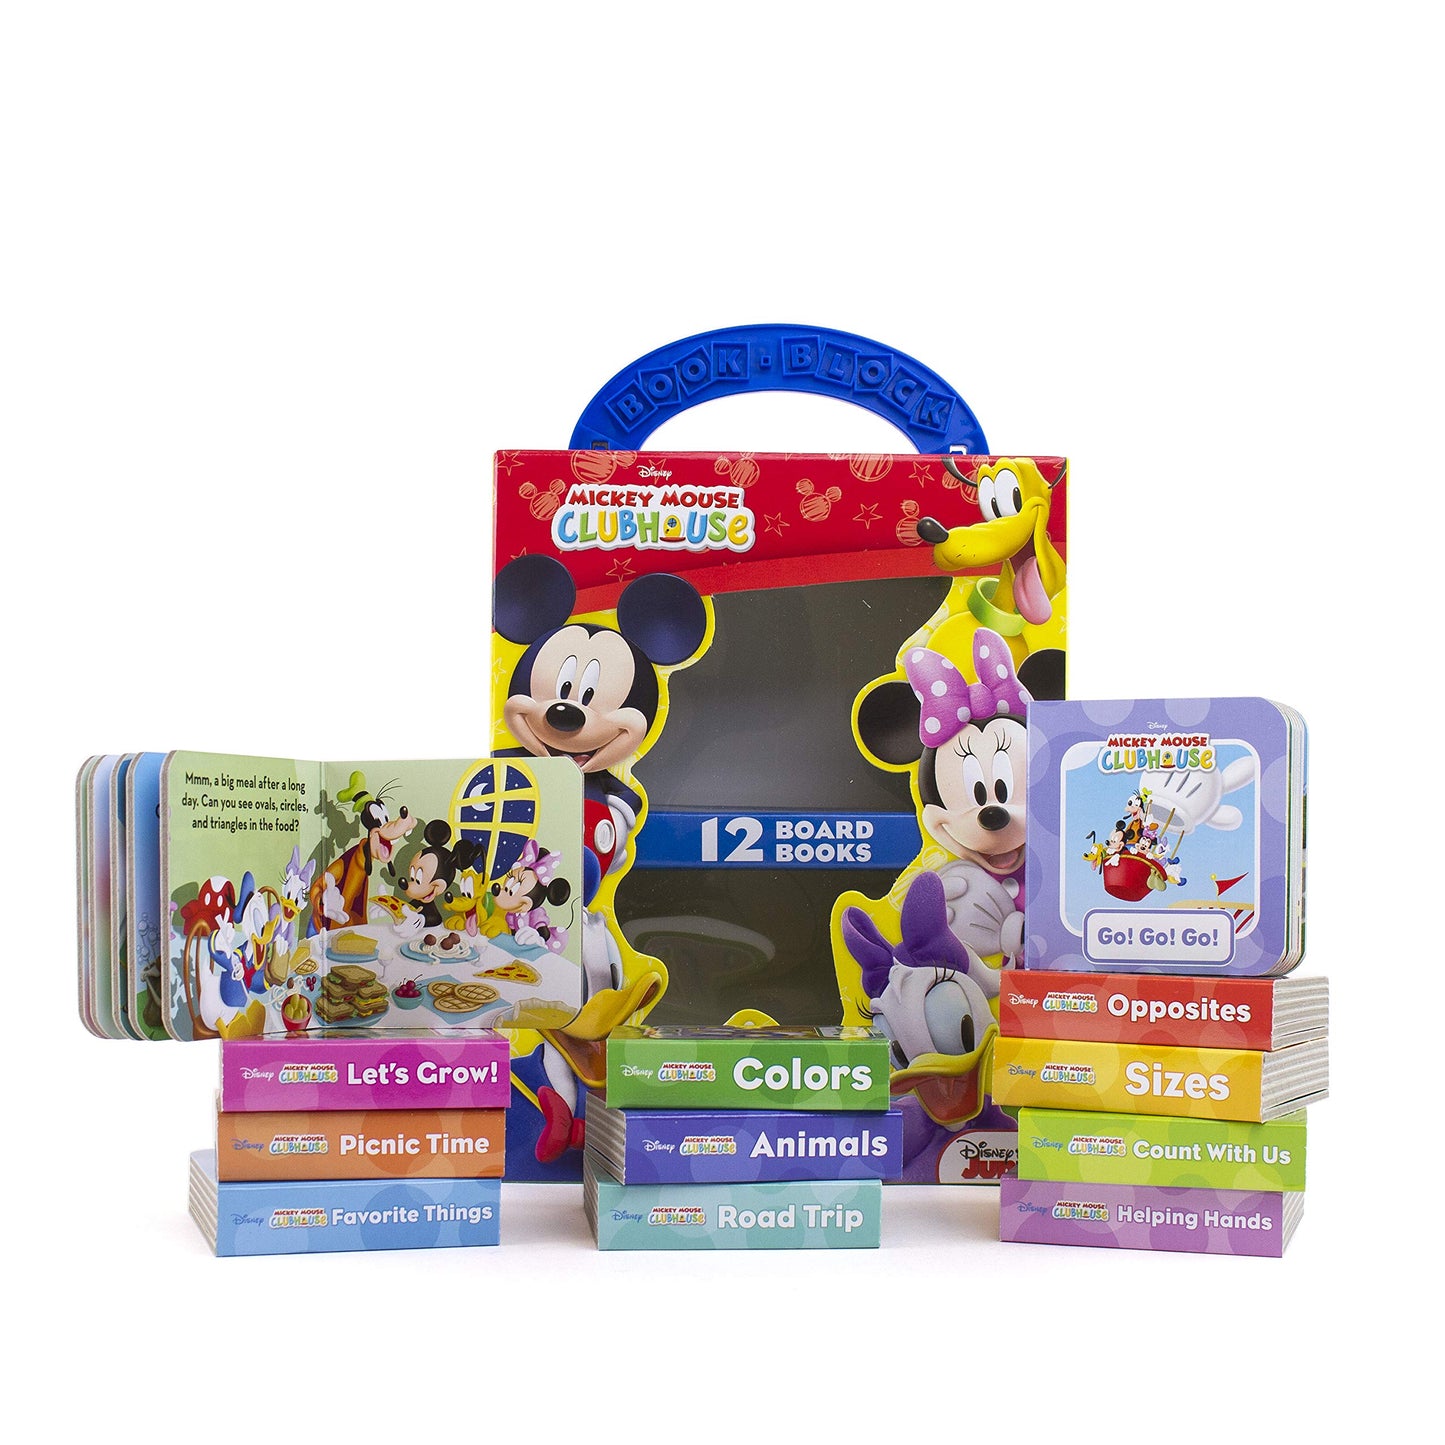 Disney Junior Mickey Mouse Clubhouse - My First Library Board Book Block 12-Book Set -Kids Board Book